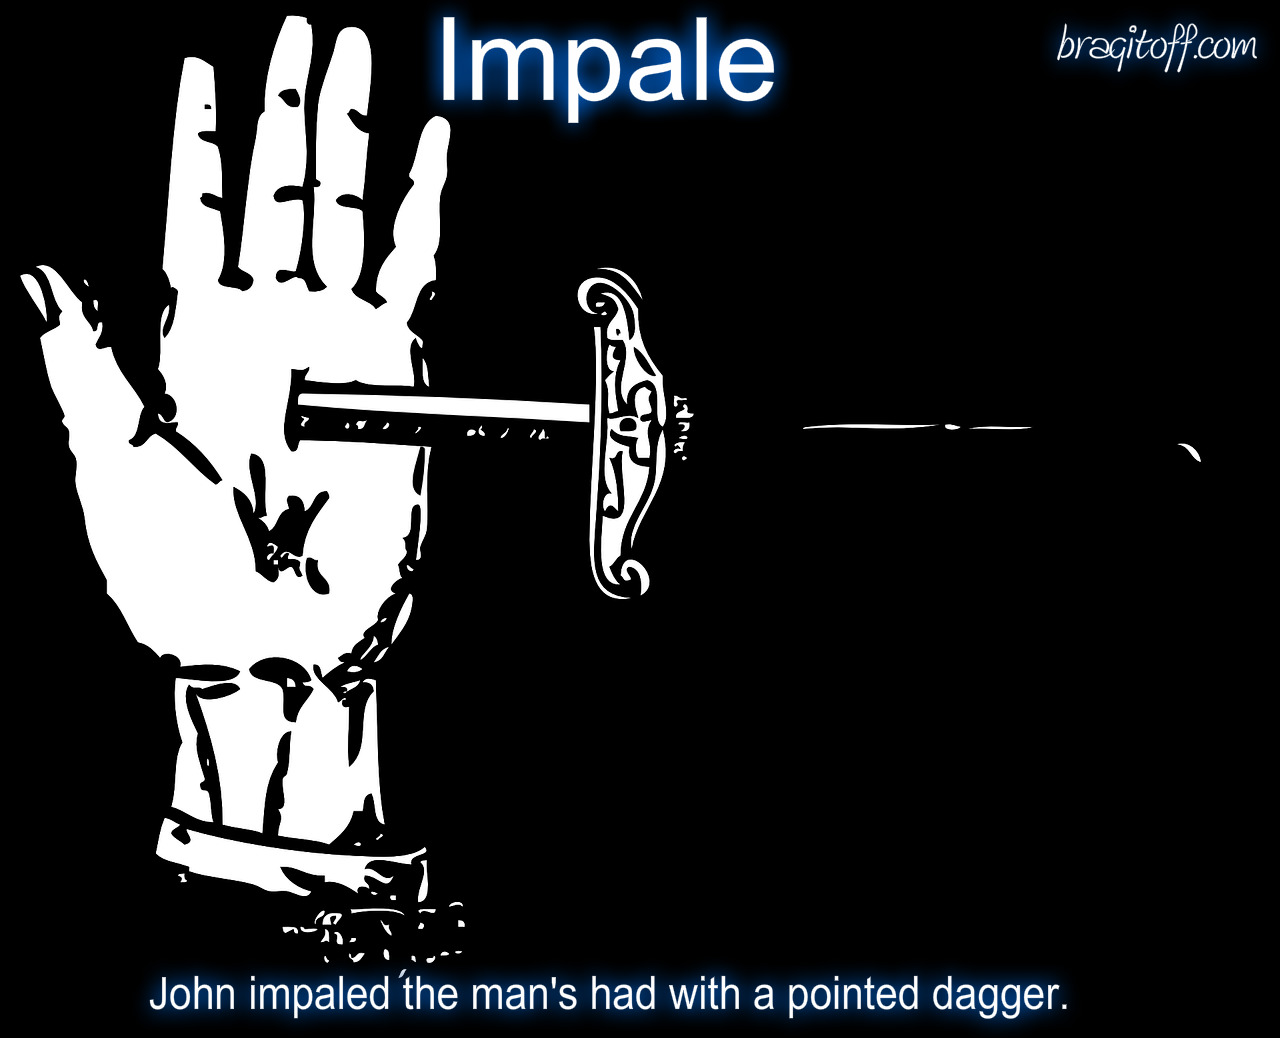 image sentence:John impaled the man's hand with a pointed dagger.